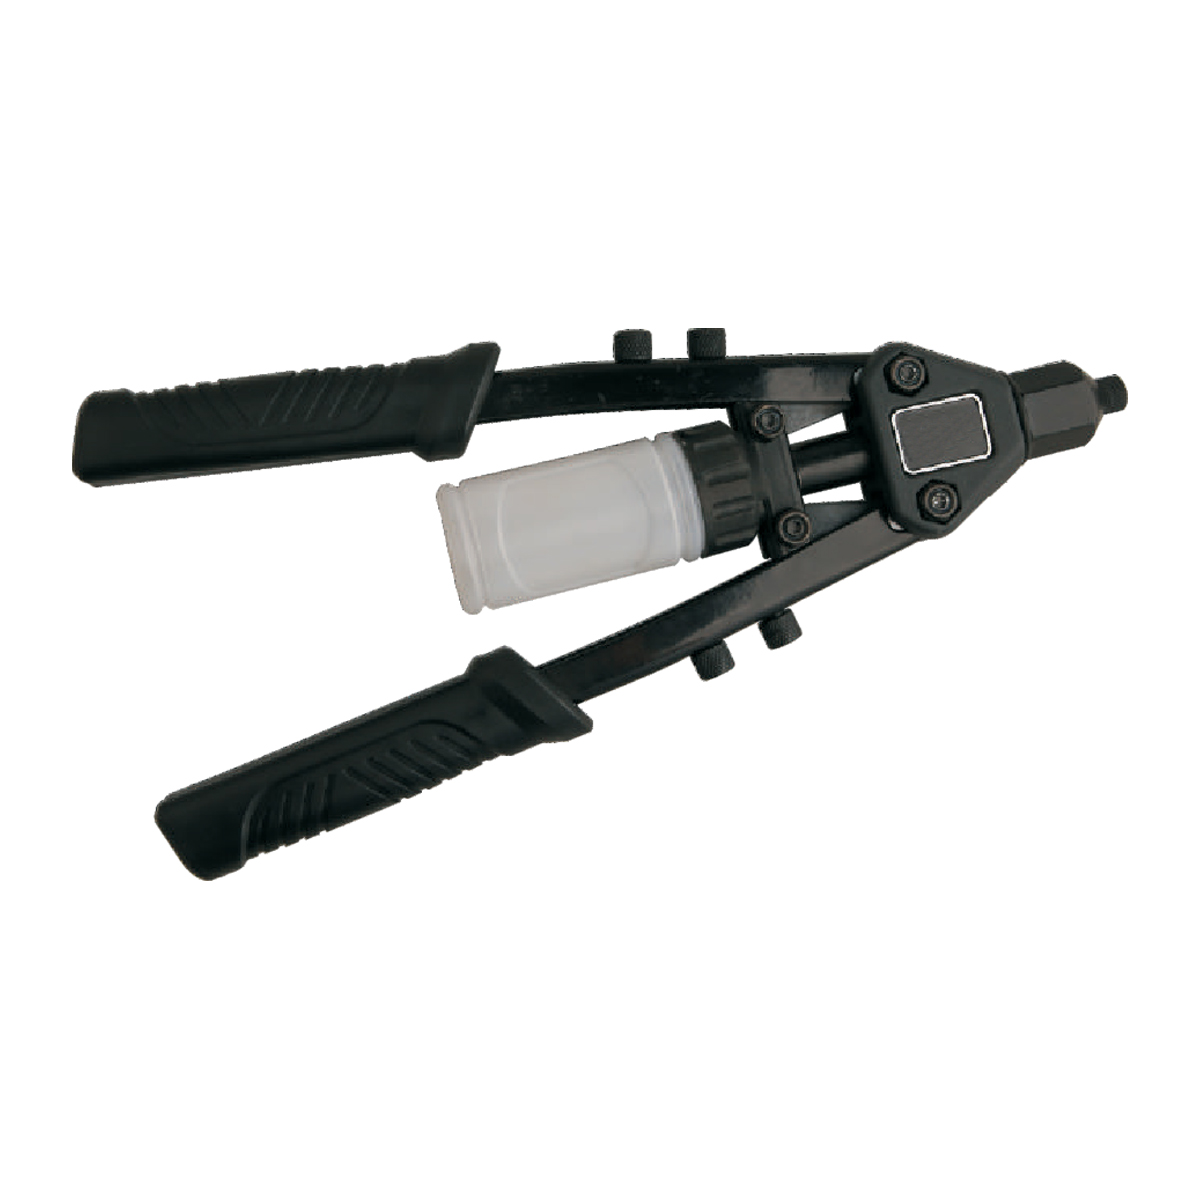 11-Inch Two-Handle Riveter